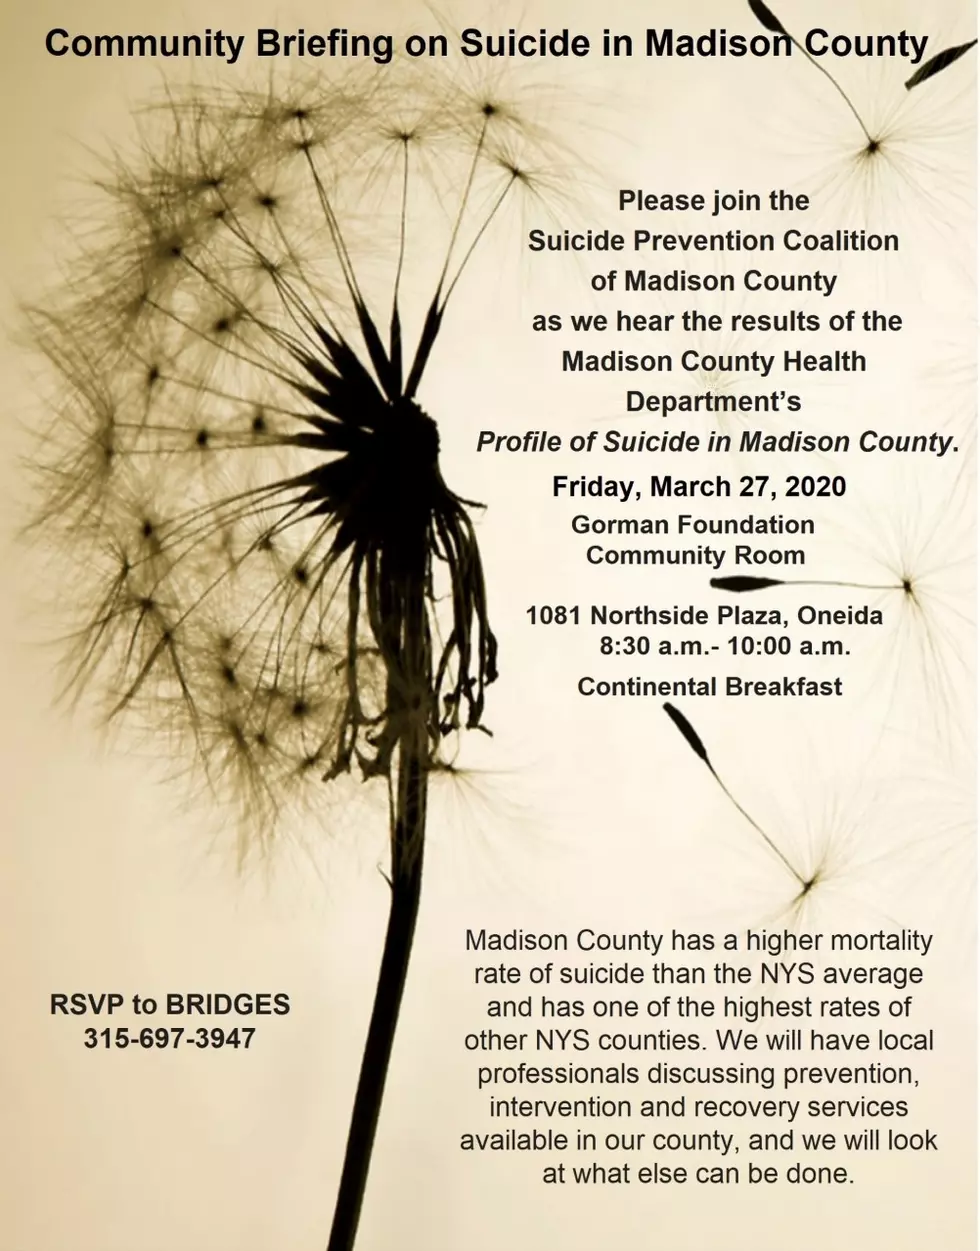 Community Briefing on Suicide in Madison County